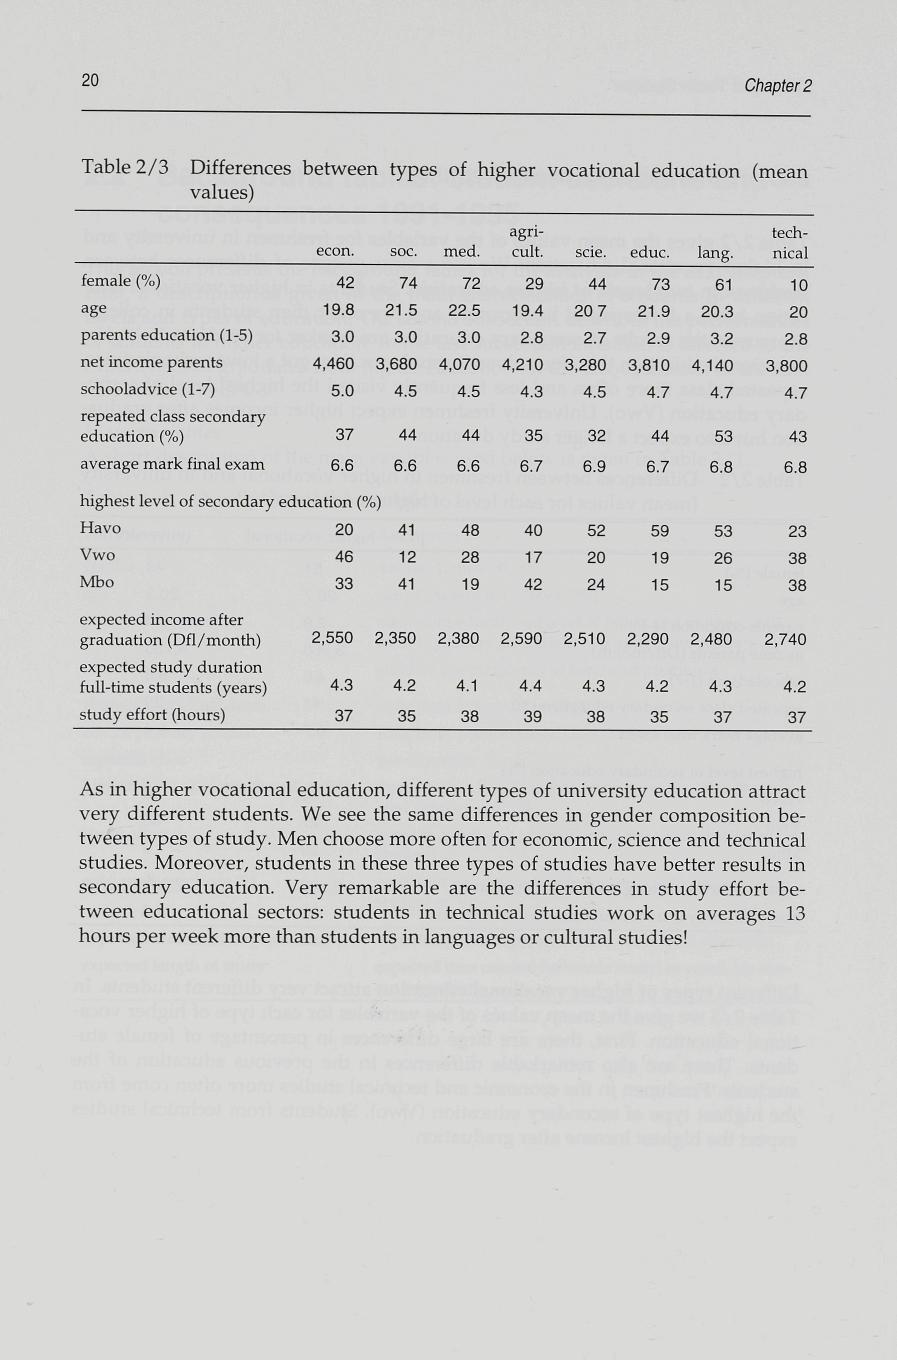 20 Chapter 2 Table 2/3 Differences between types of higher vocational education (mean values) econ. soc. med. agricult. scie. educ. lang. technical female (%) 42 74 72 29 44 73 61 10 age 19.8 21.5 22.